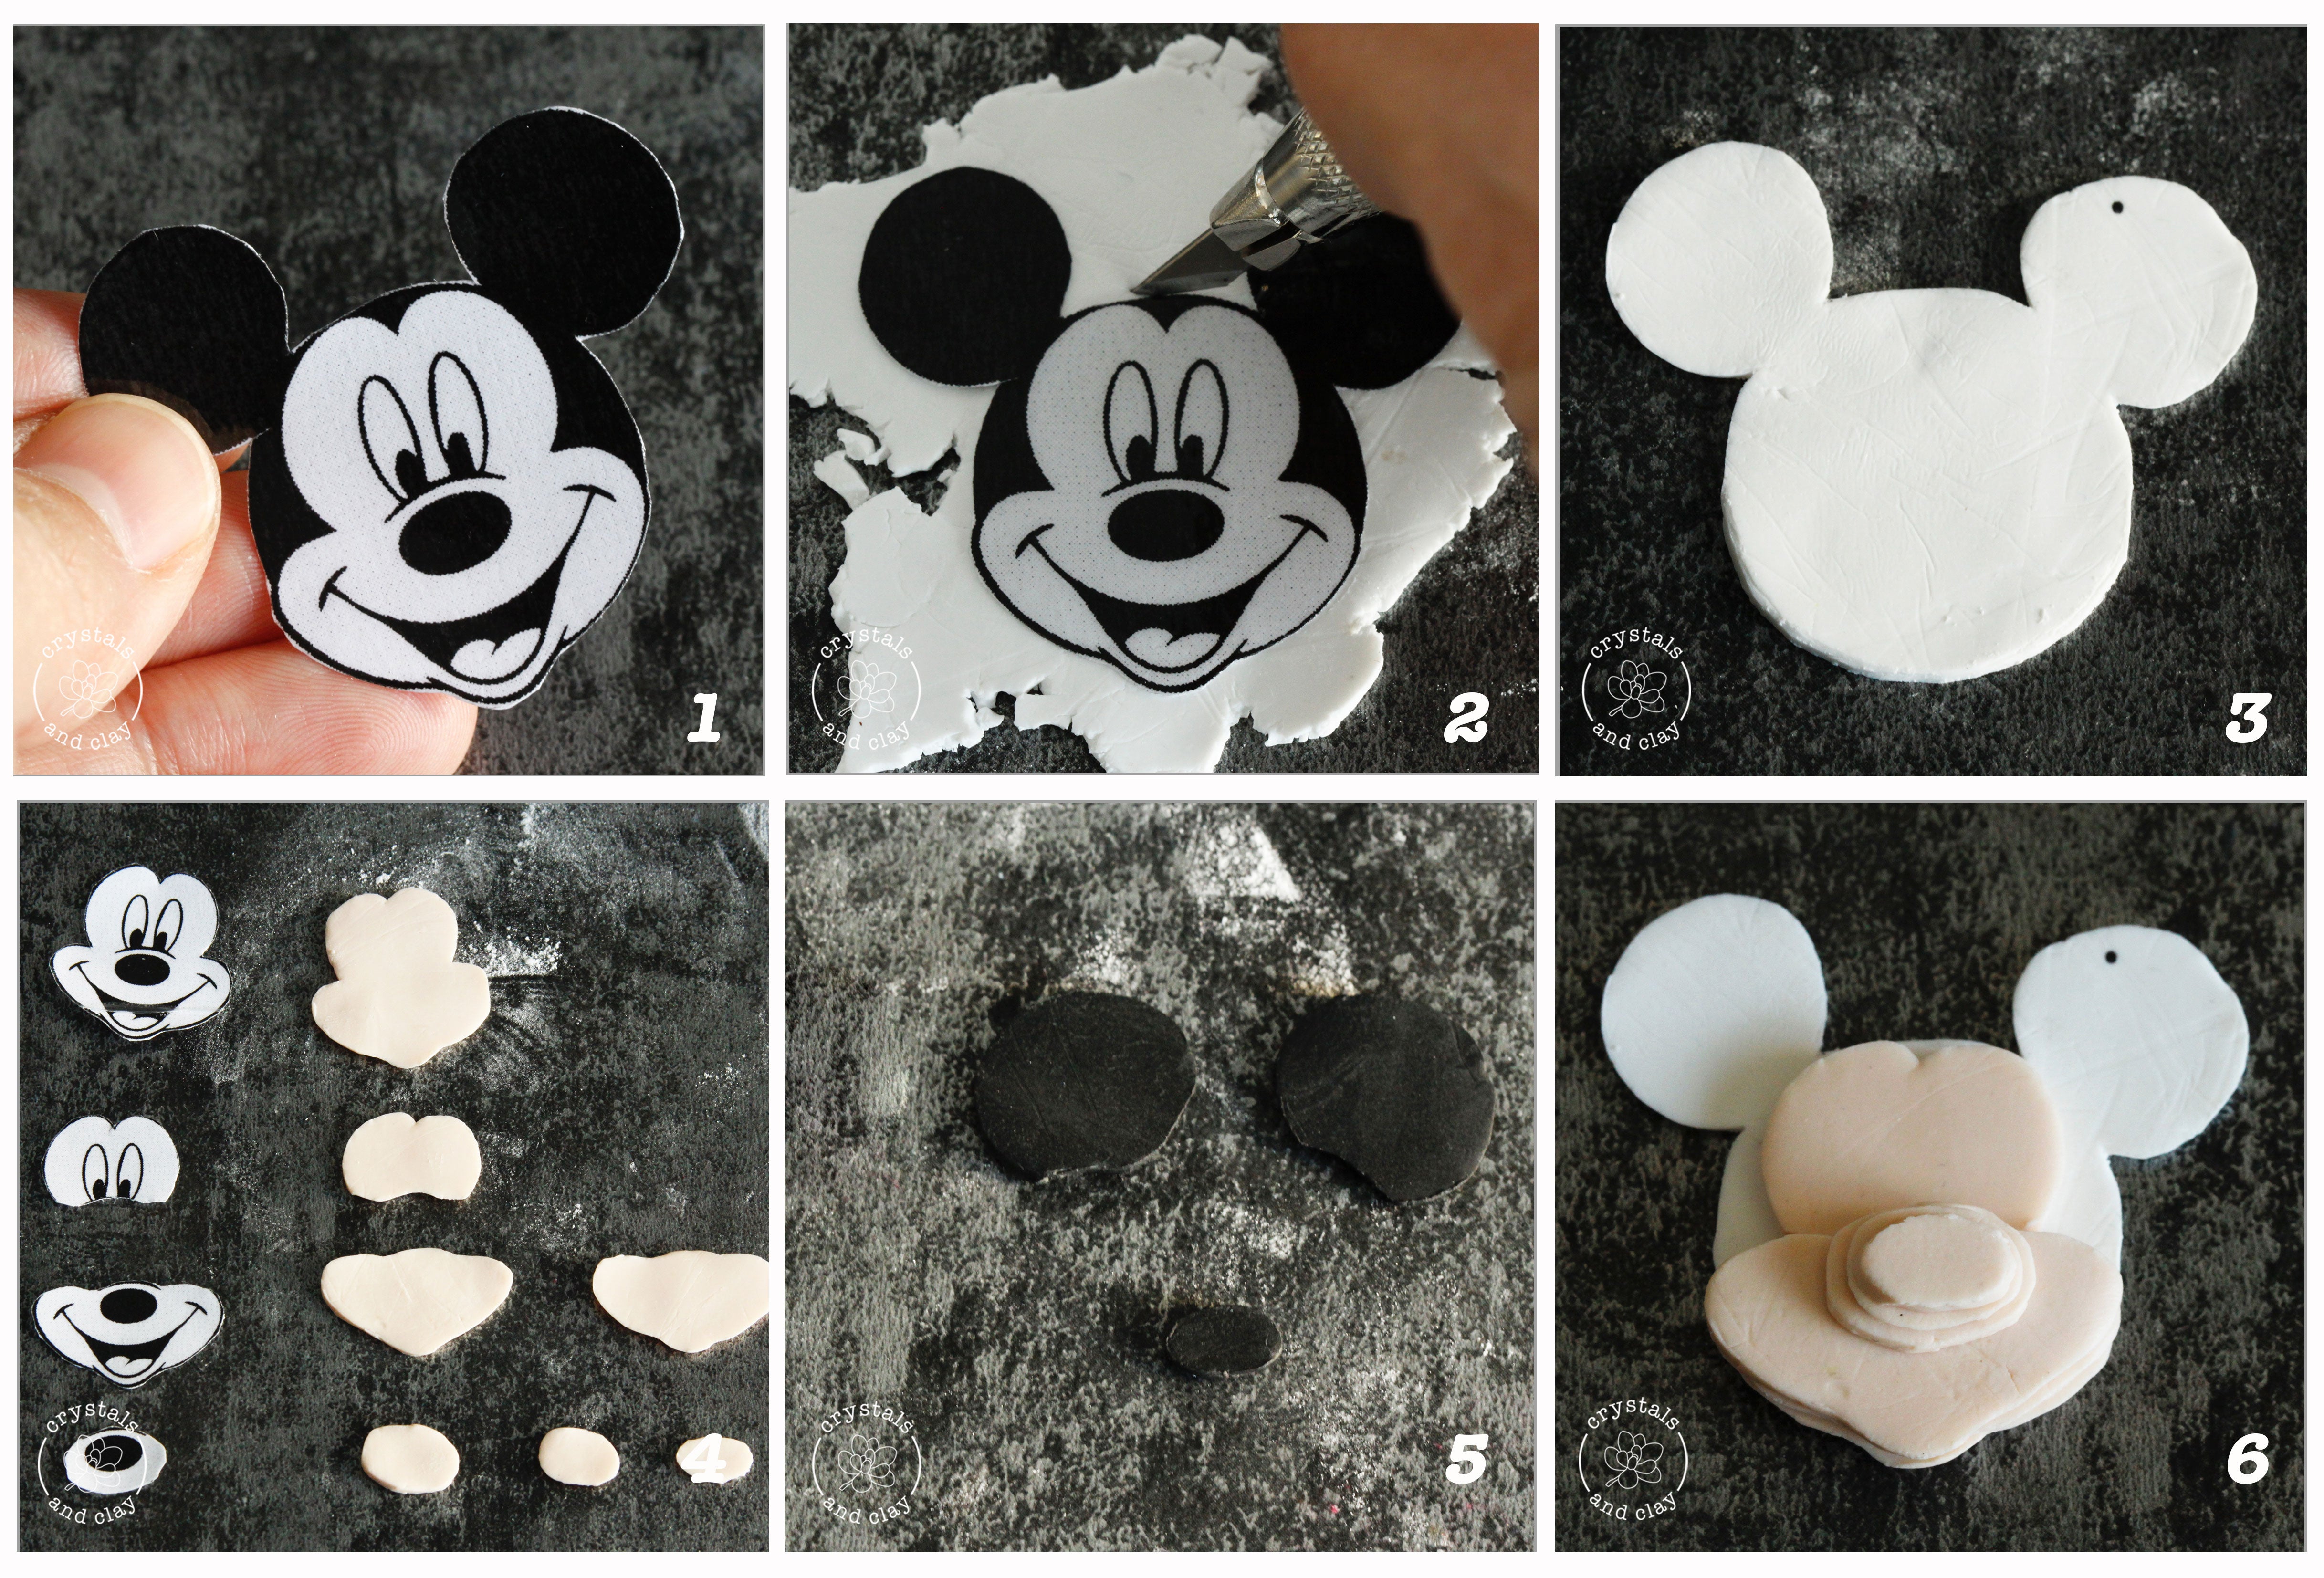 how to make polymer clay Mickey mouse